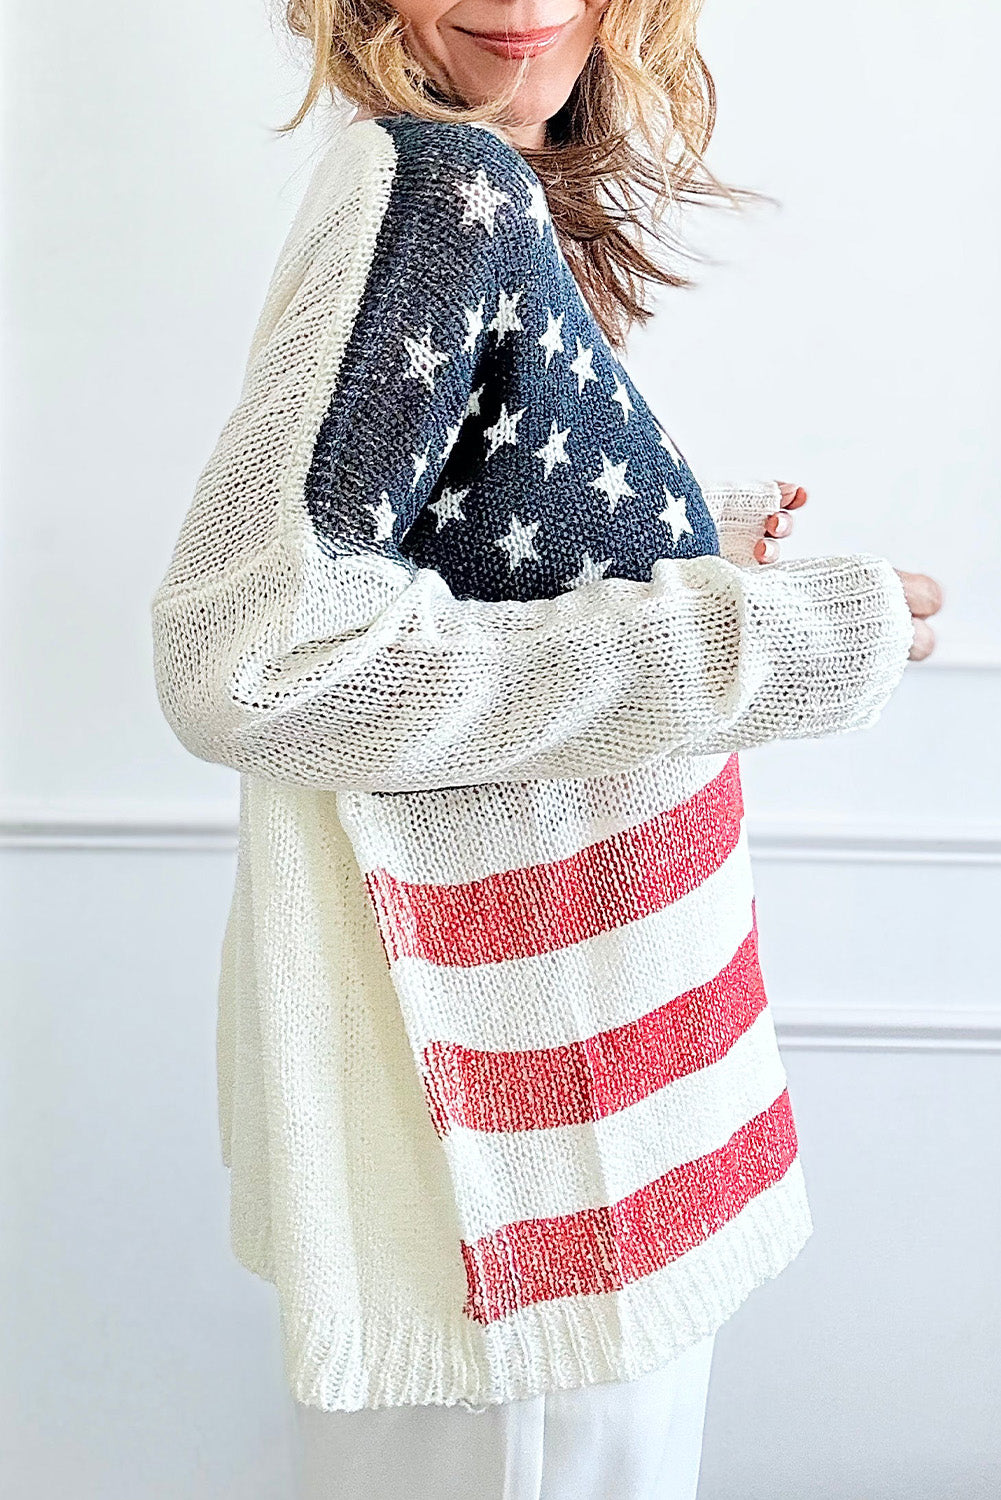 White American Flag Knitted Loose Long Sleeve Sweater Pre Order Sweaters & Cardigans JT's Designer Fashion